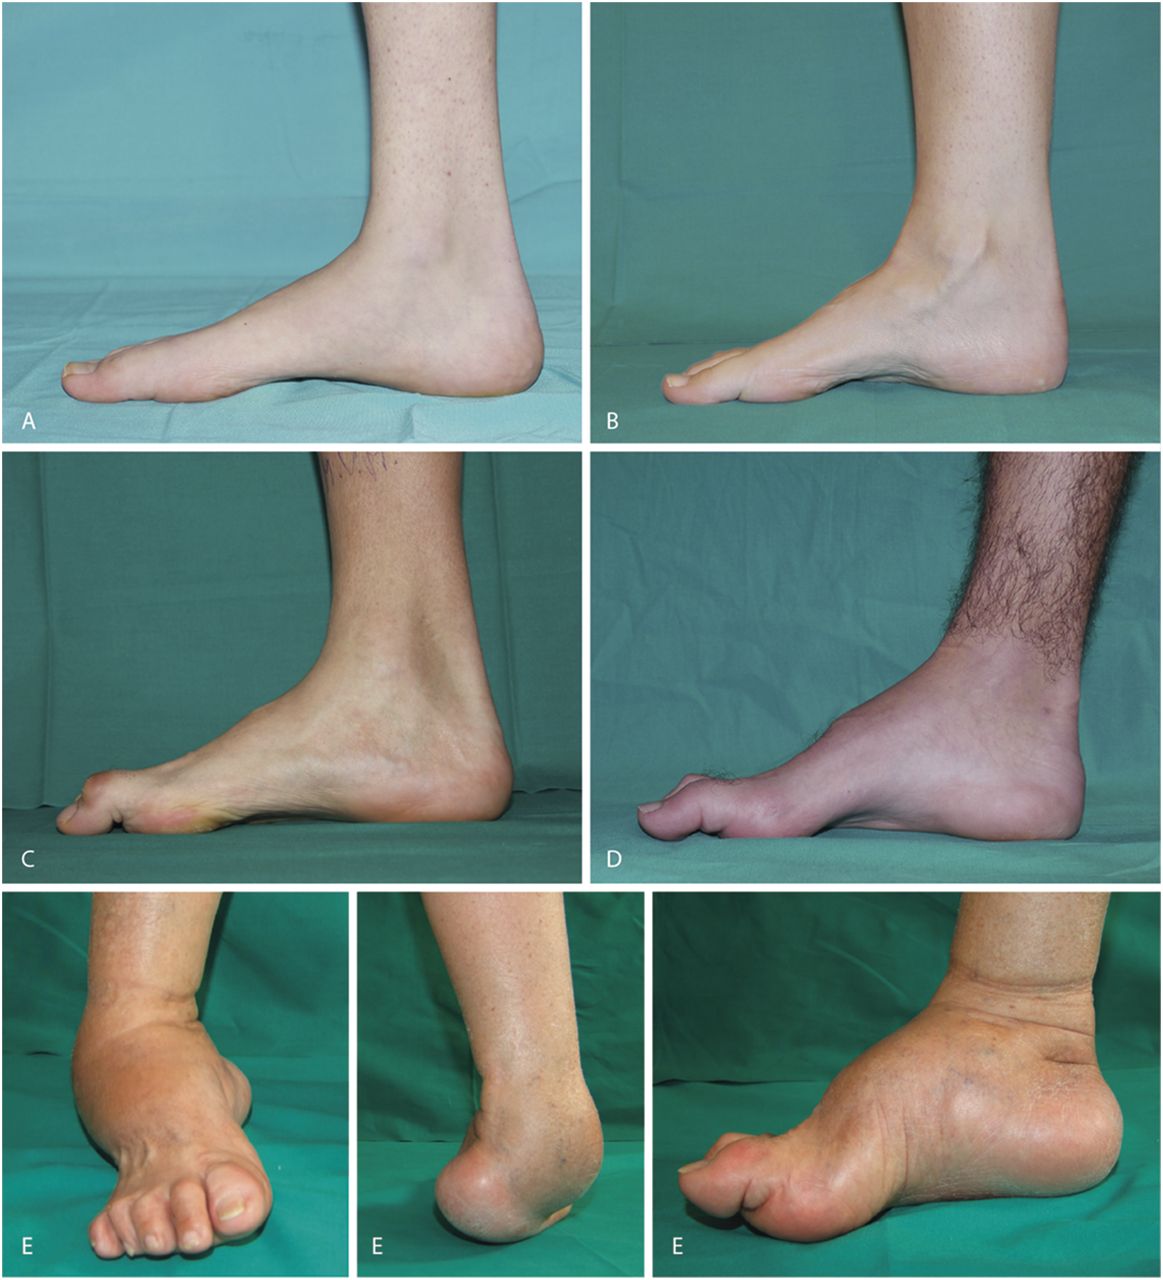 Charcot-Marie-Tooth disease